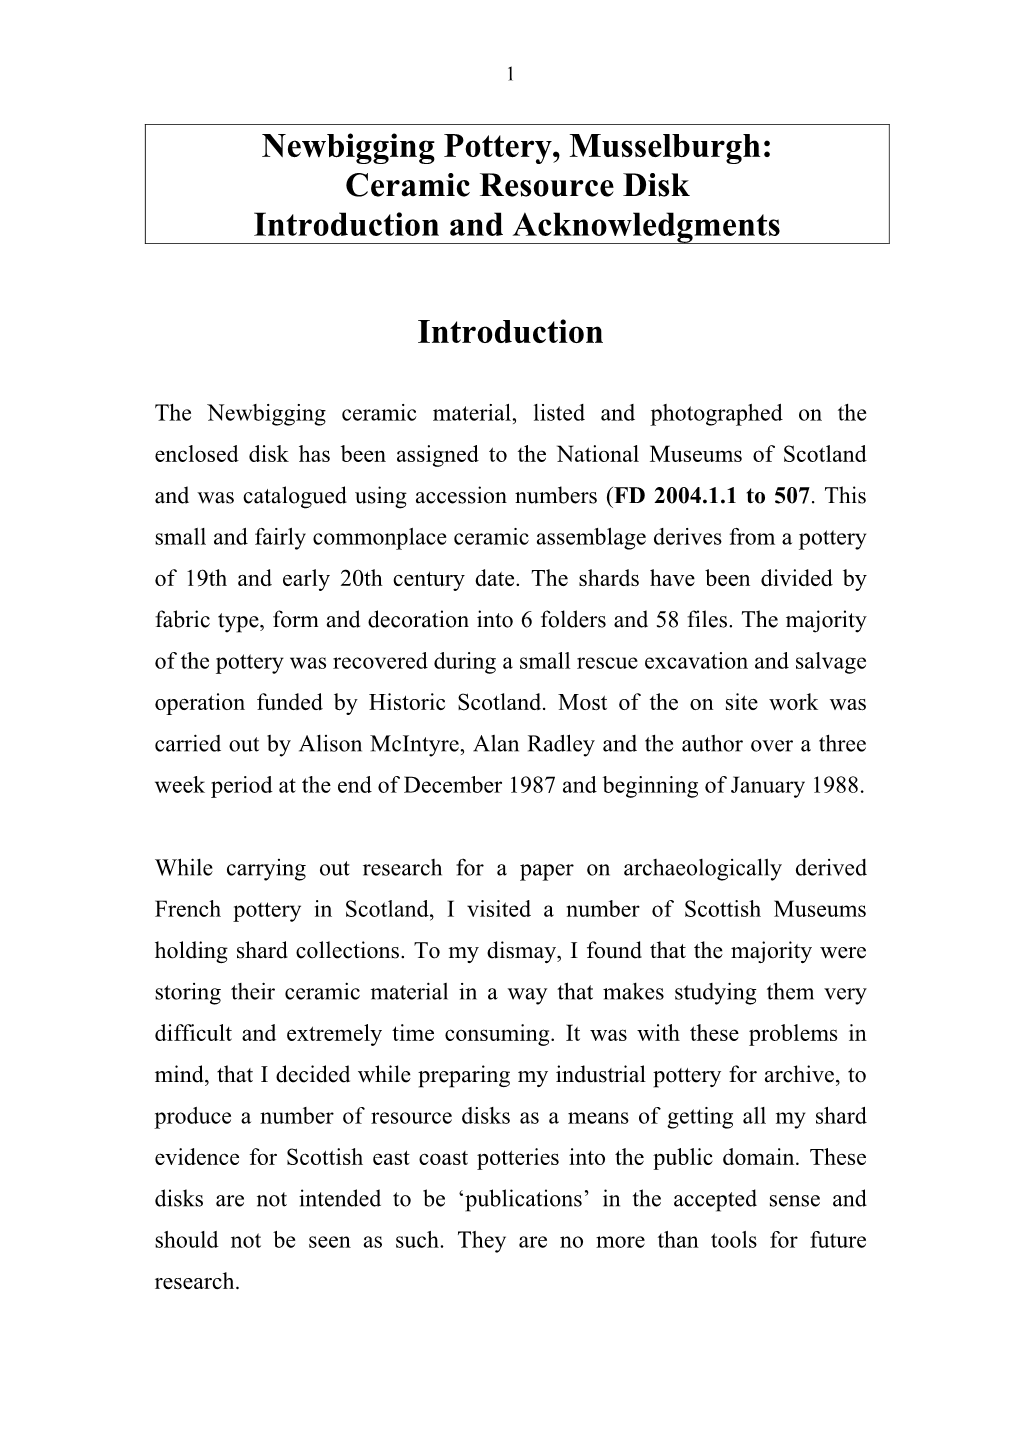 Newbigging Pottery, Musselburgh: Ceramic Resource Disk Introduction and Acknowledgments